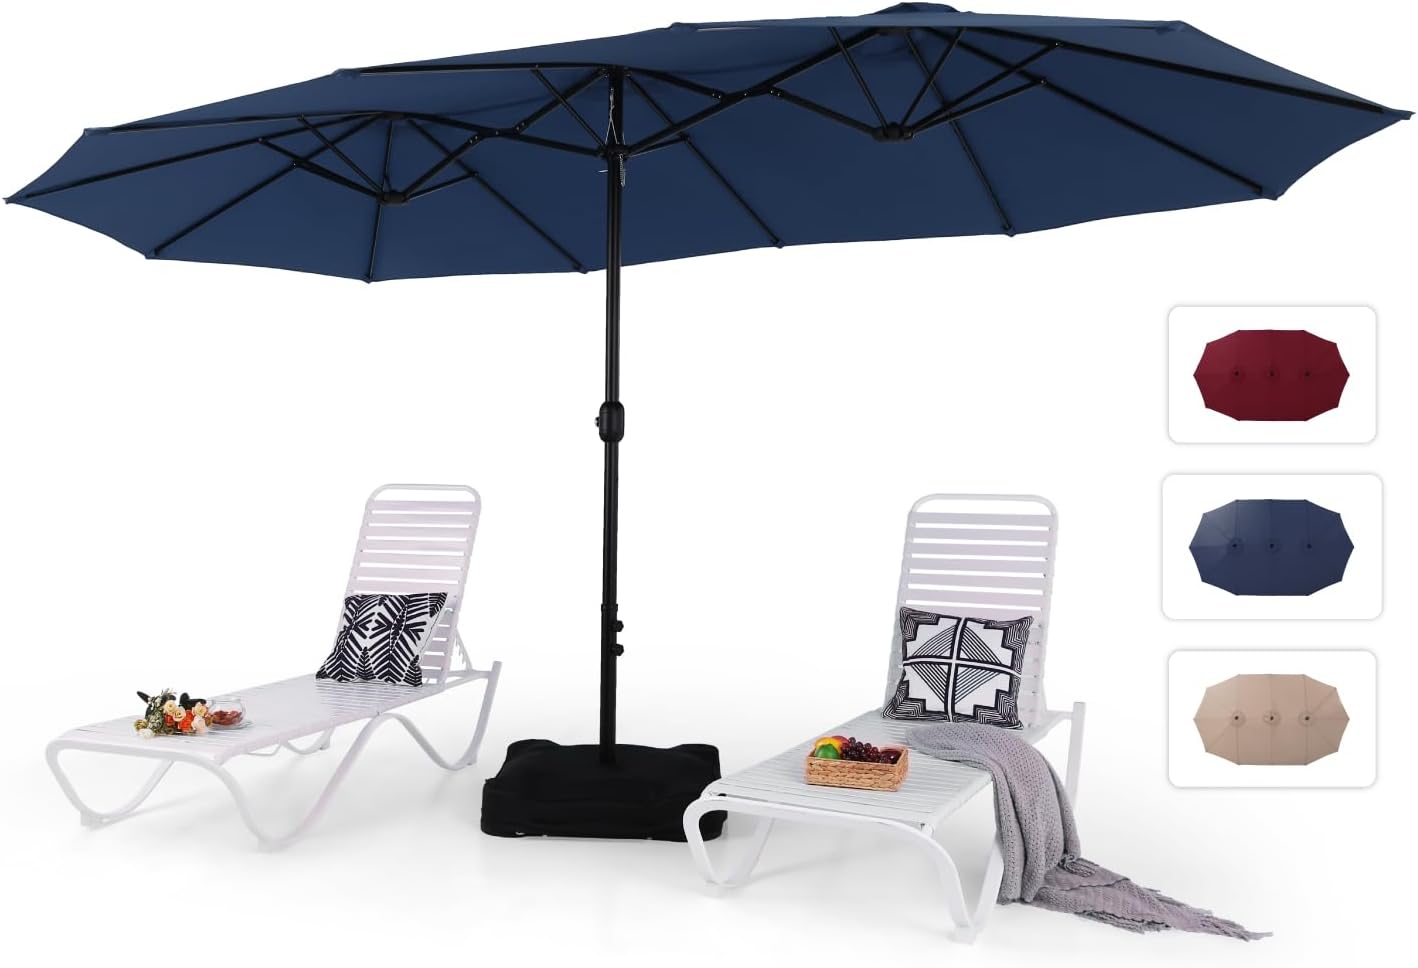 MFSTUDIO 15ft Double Sided Patio Umbrella with Base Included, Outdoor Large Rectangular Market Umbrellas with Crank Handle for Deck Pool Shade